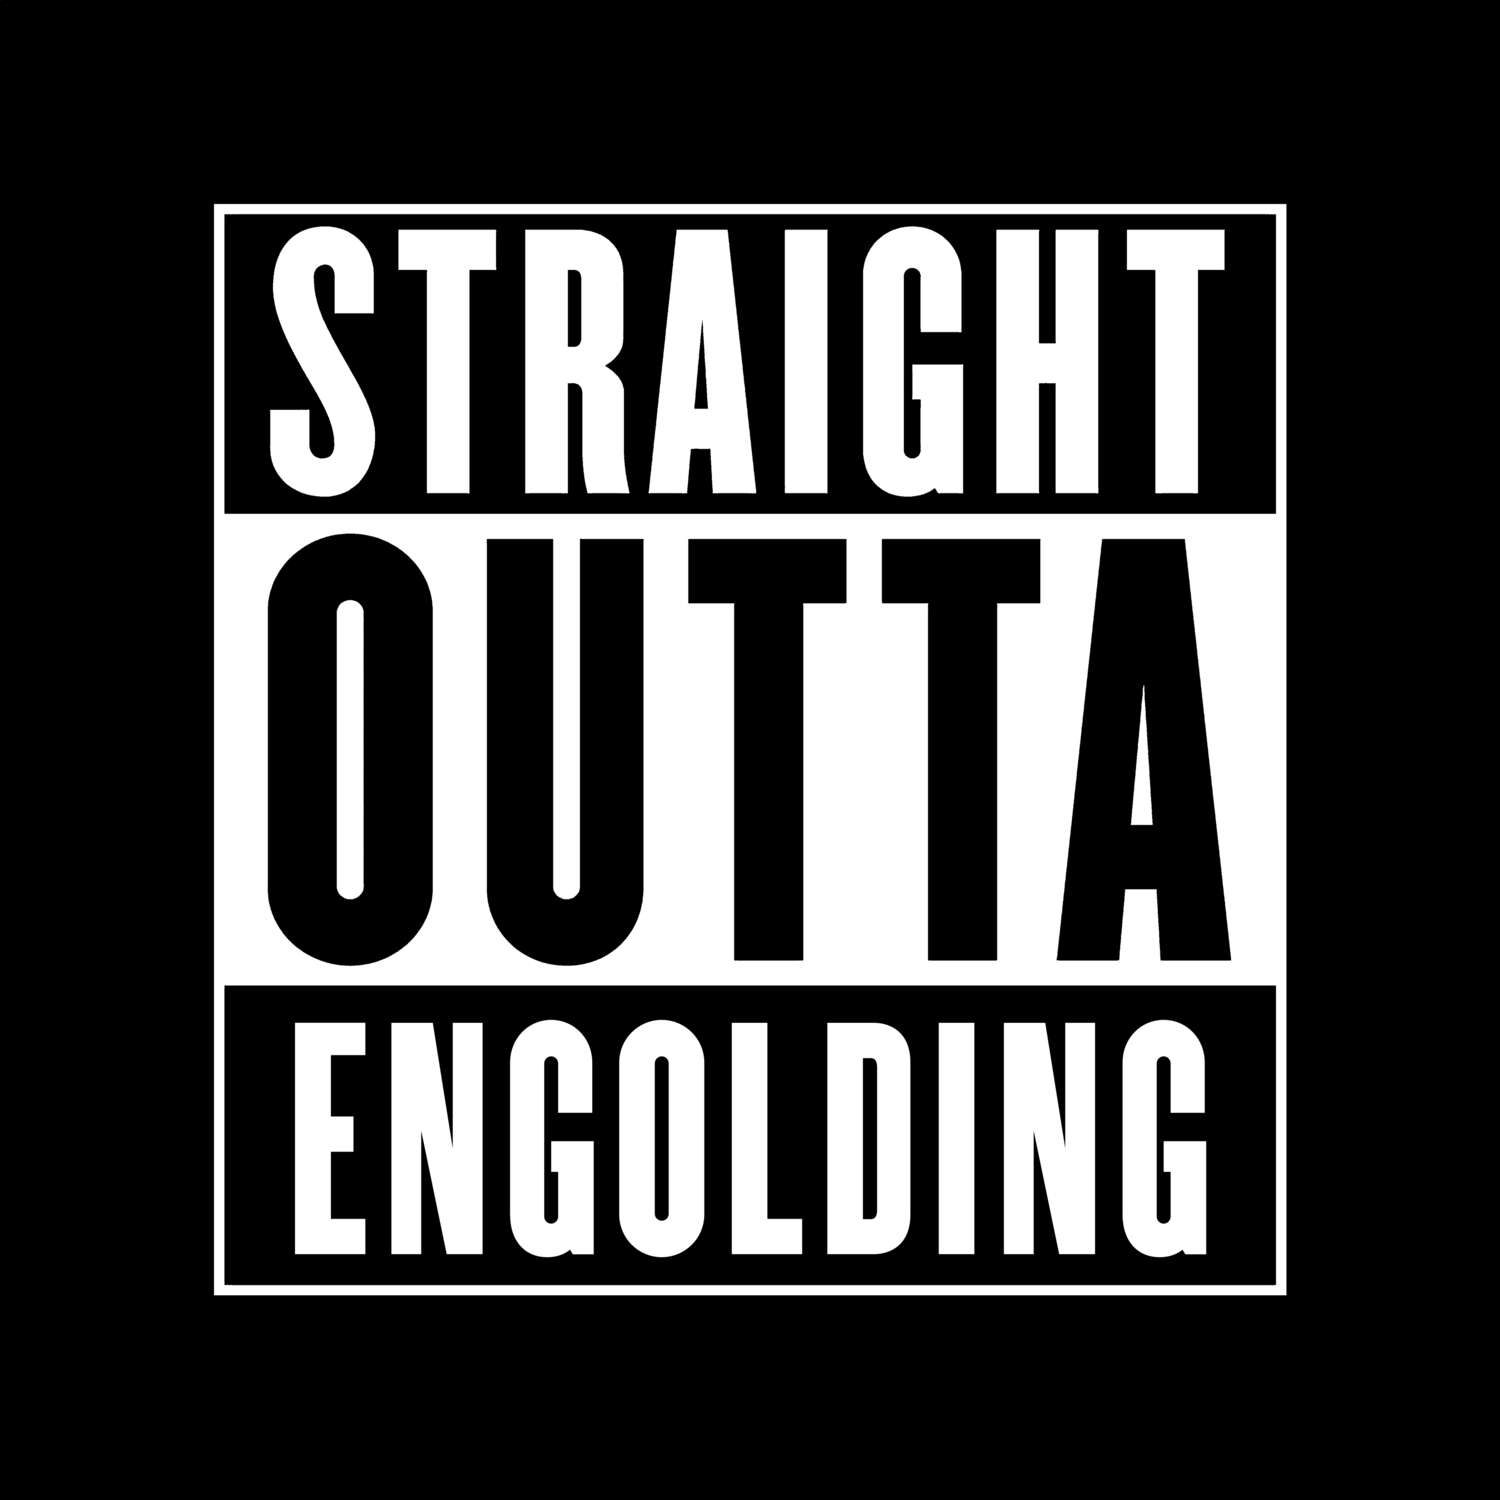 Engolding T-Shirt »Straight Outta«